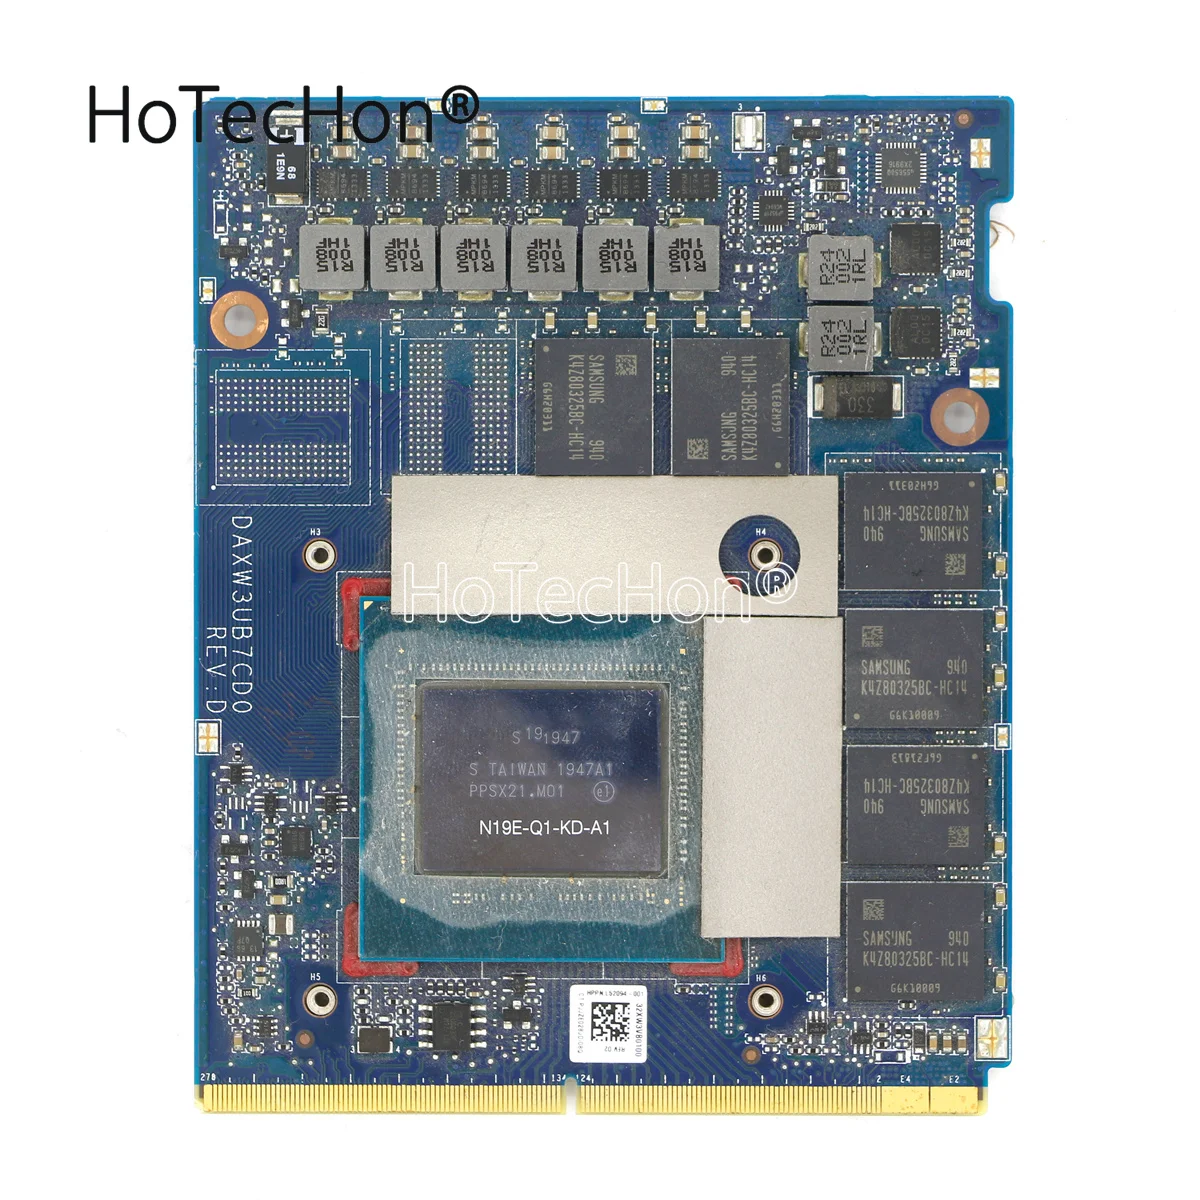 

L52094-001 NVidia Quadro RTX 3000 N19E-Q1-KD-A1 MXM3.0b 6GB Video Card DAXW3UB7CD0 for HP ZBook 17 G6